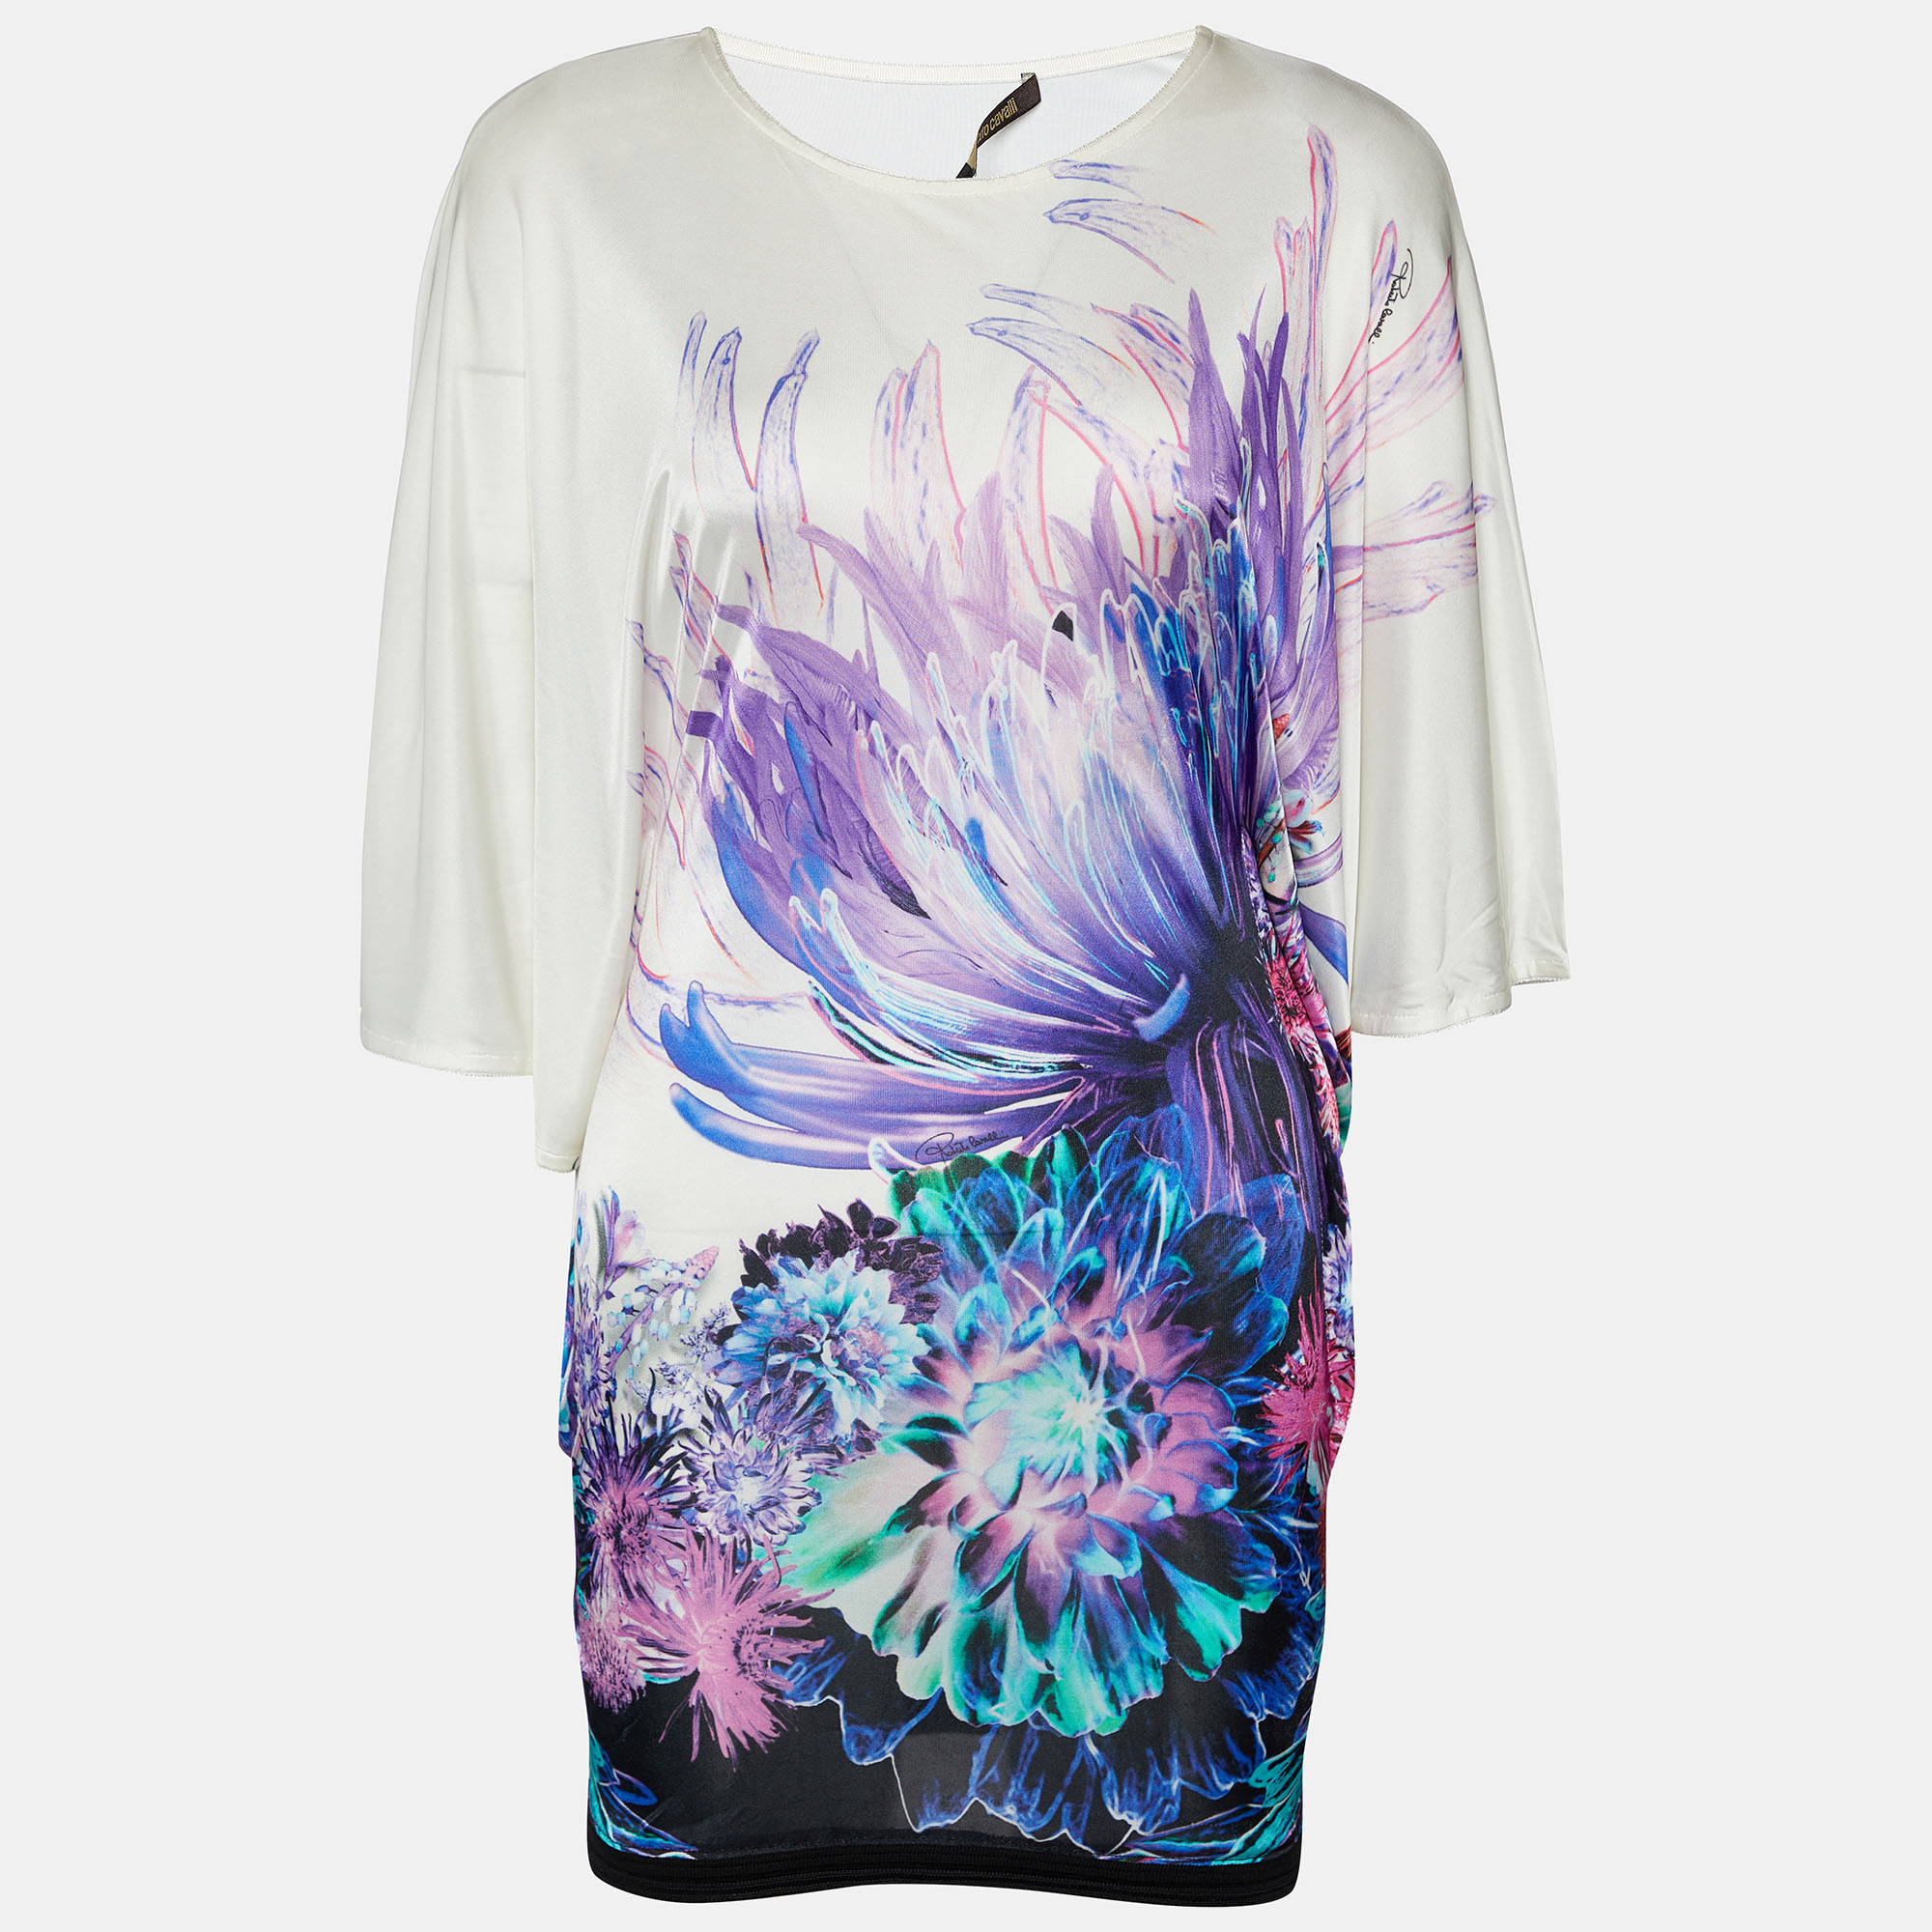 Roberto Cavalli White Printed Jersey Butterfly Sleeve Top S